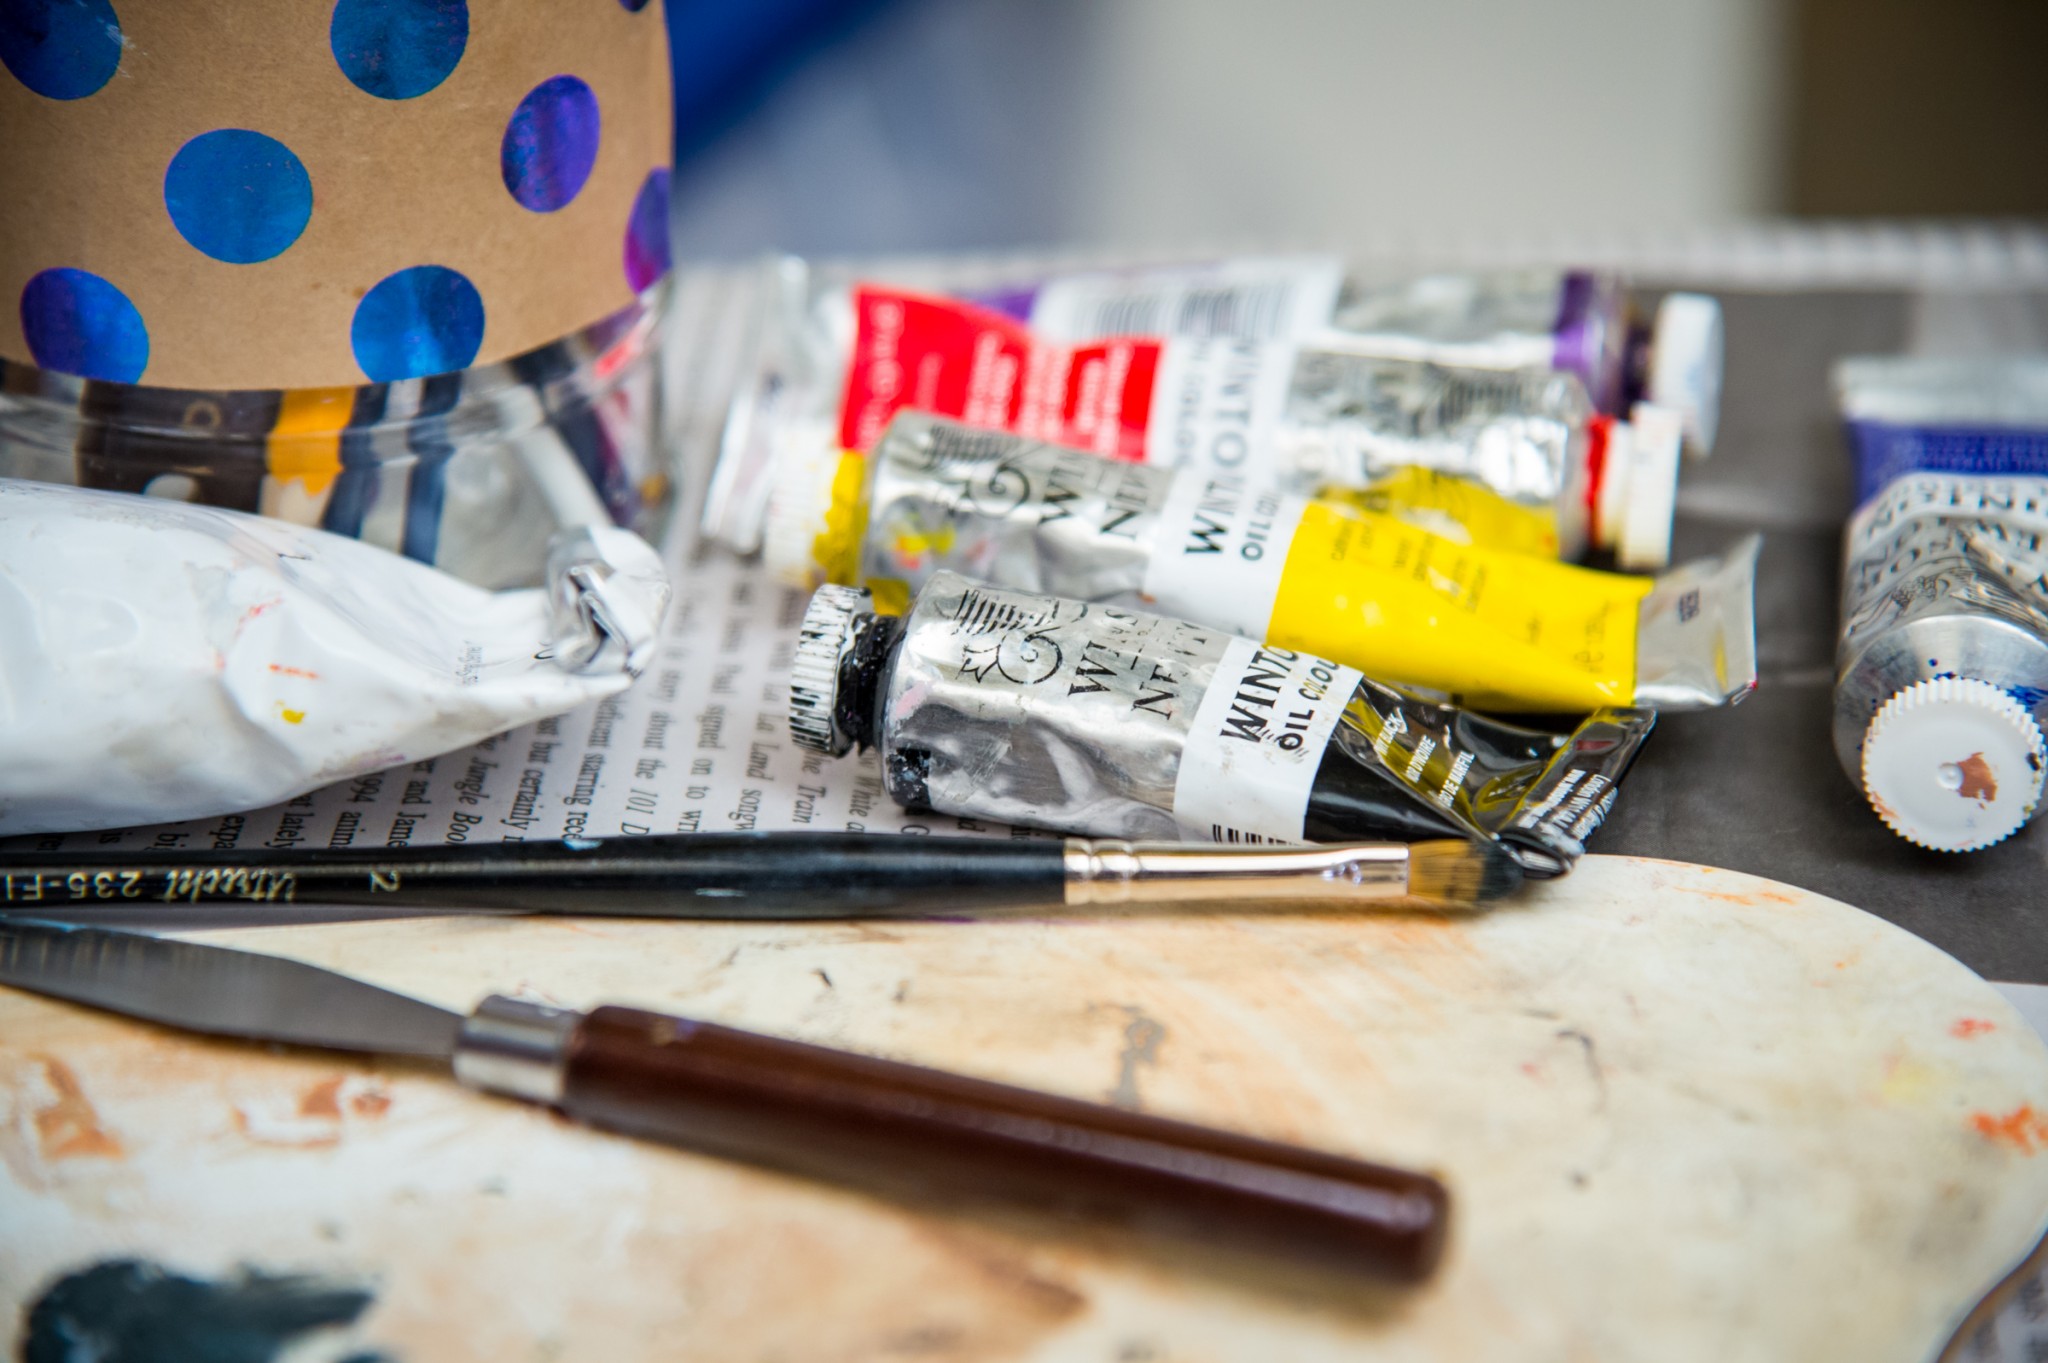 Picture of art tools laid out on the table in the Art Studio